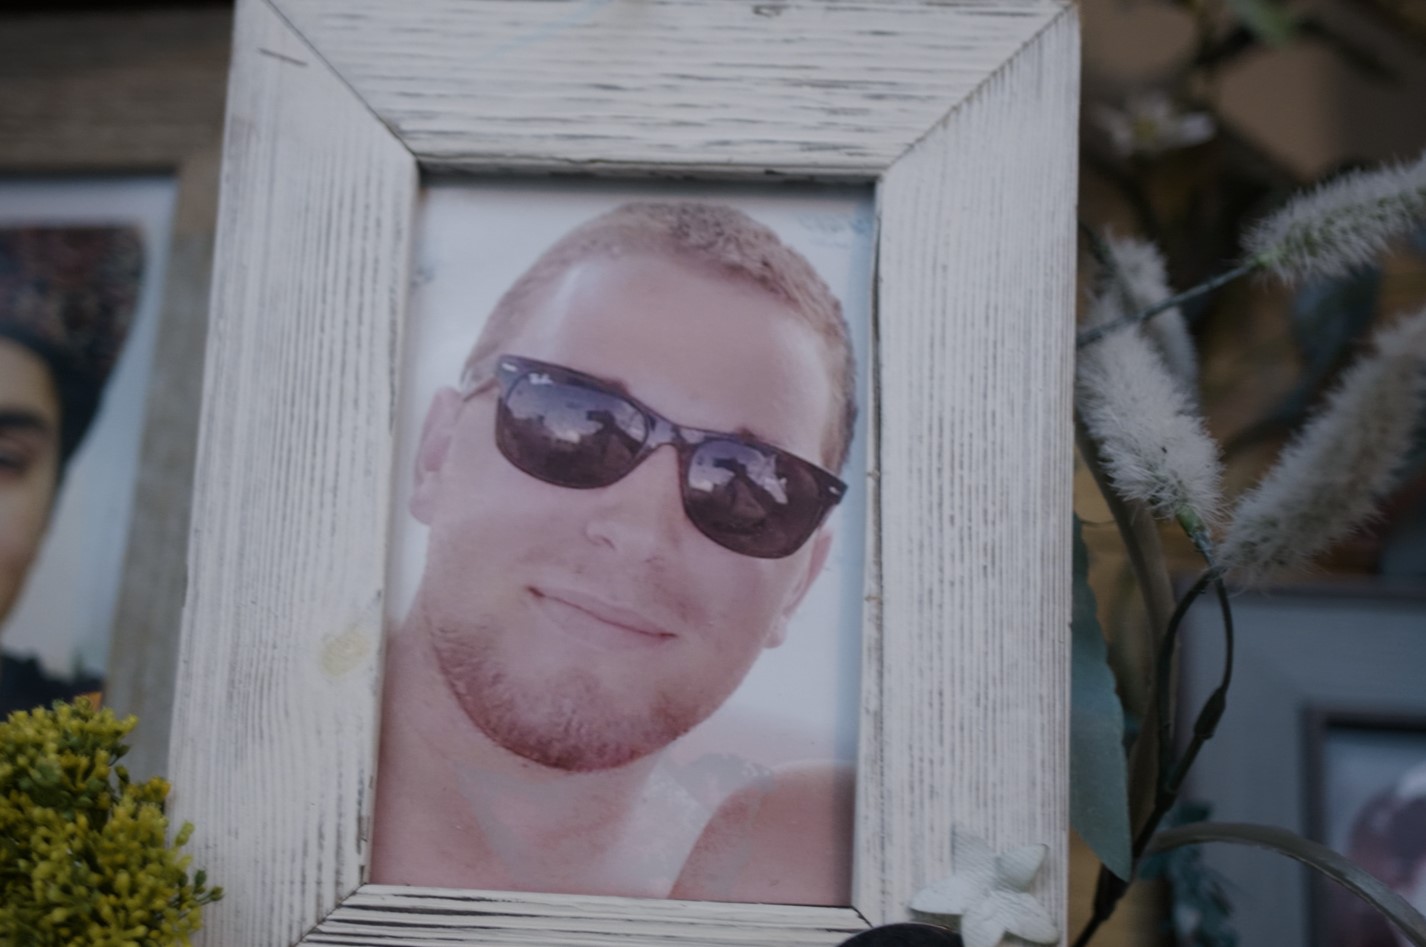 A framed photo of a man wearing sunglasses